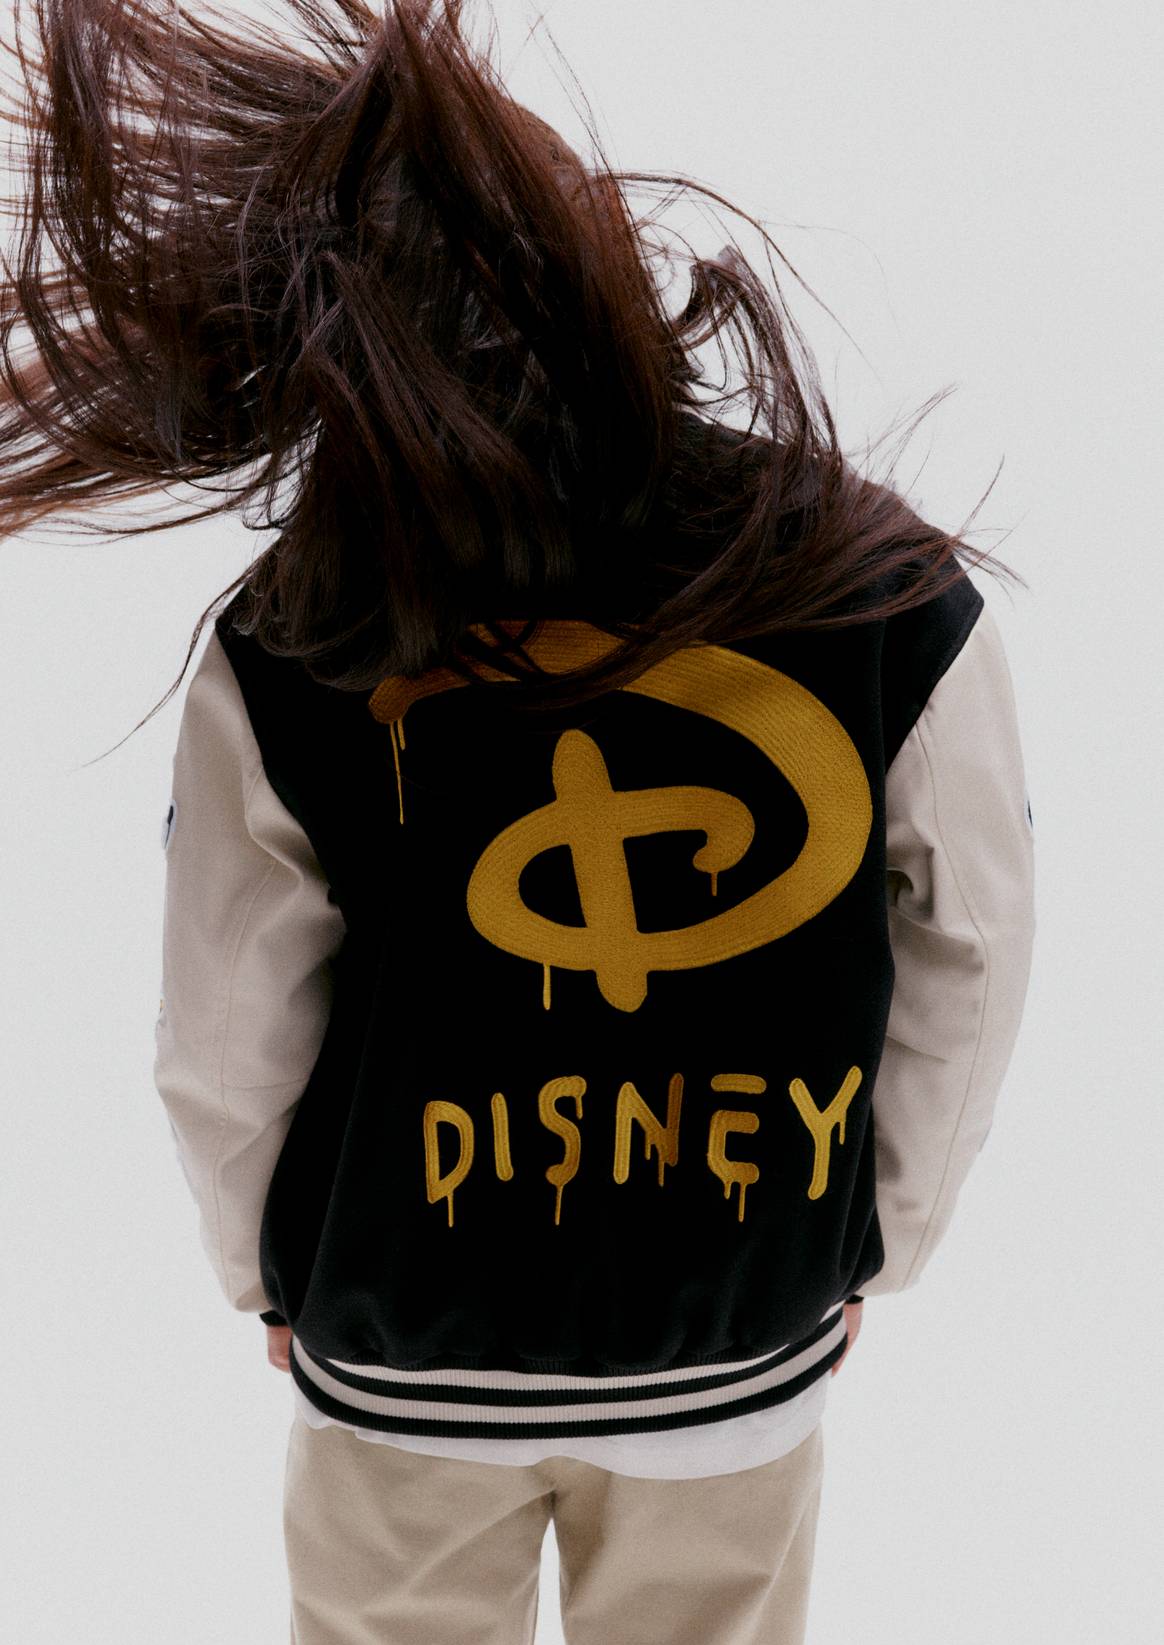 Disney100 x H&M collection by Trevor Andrew